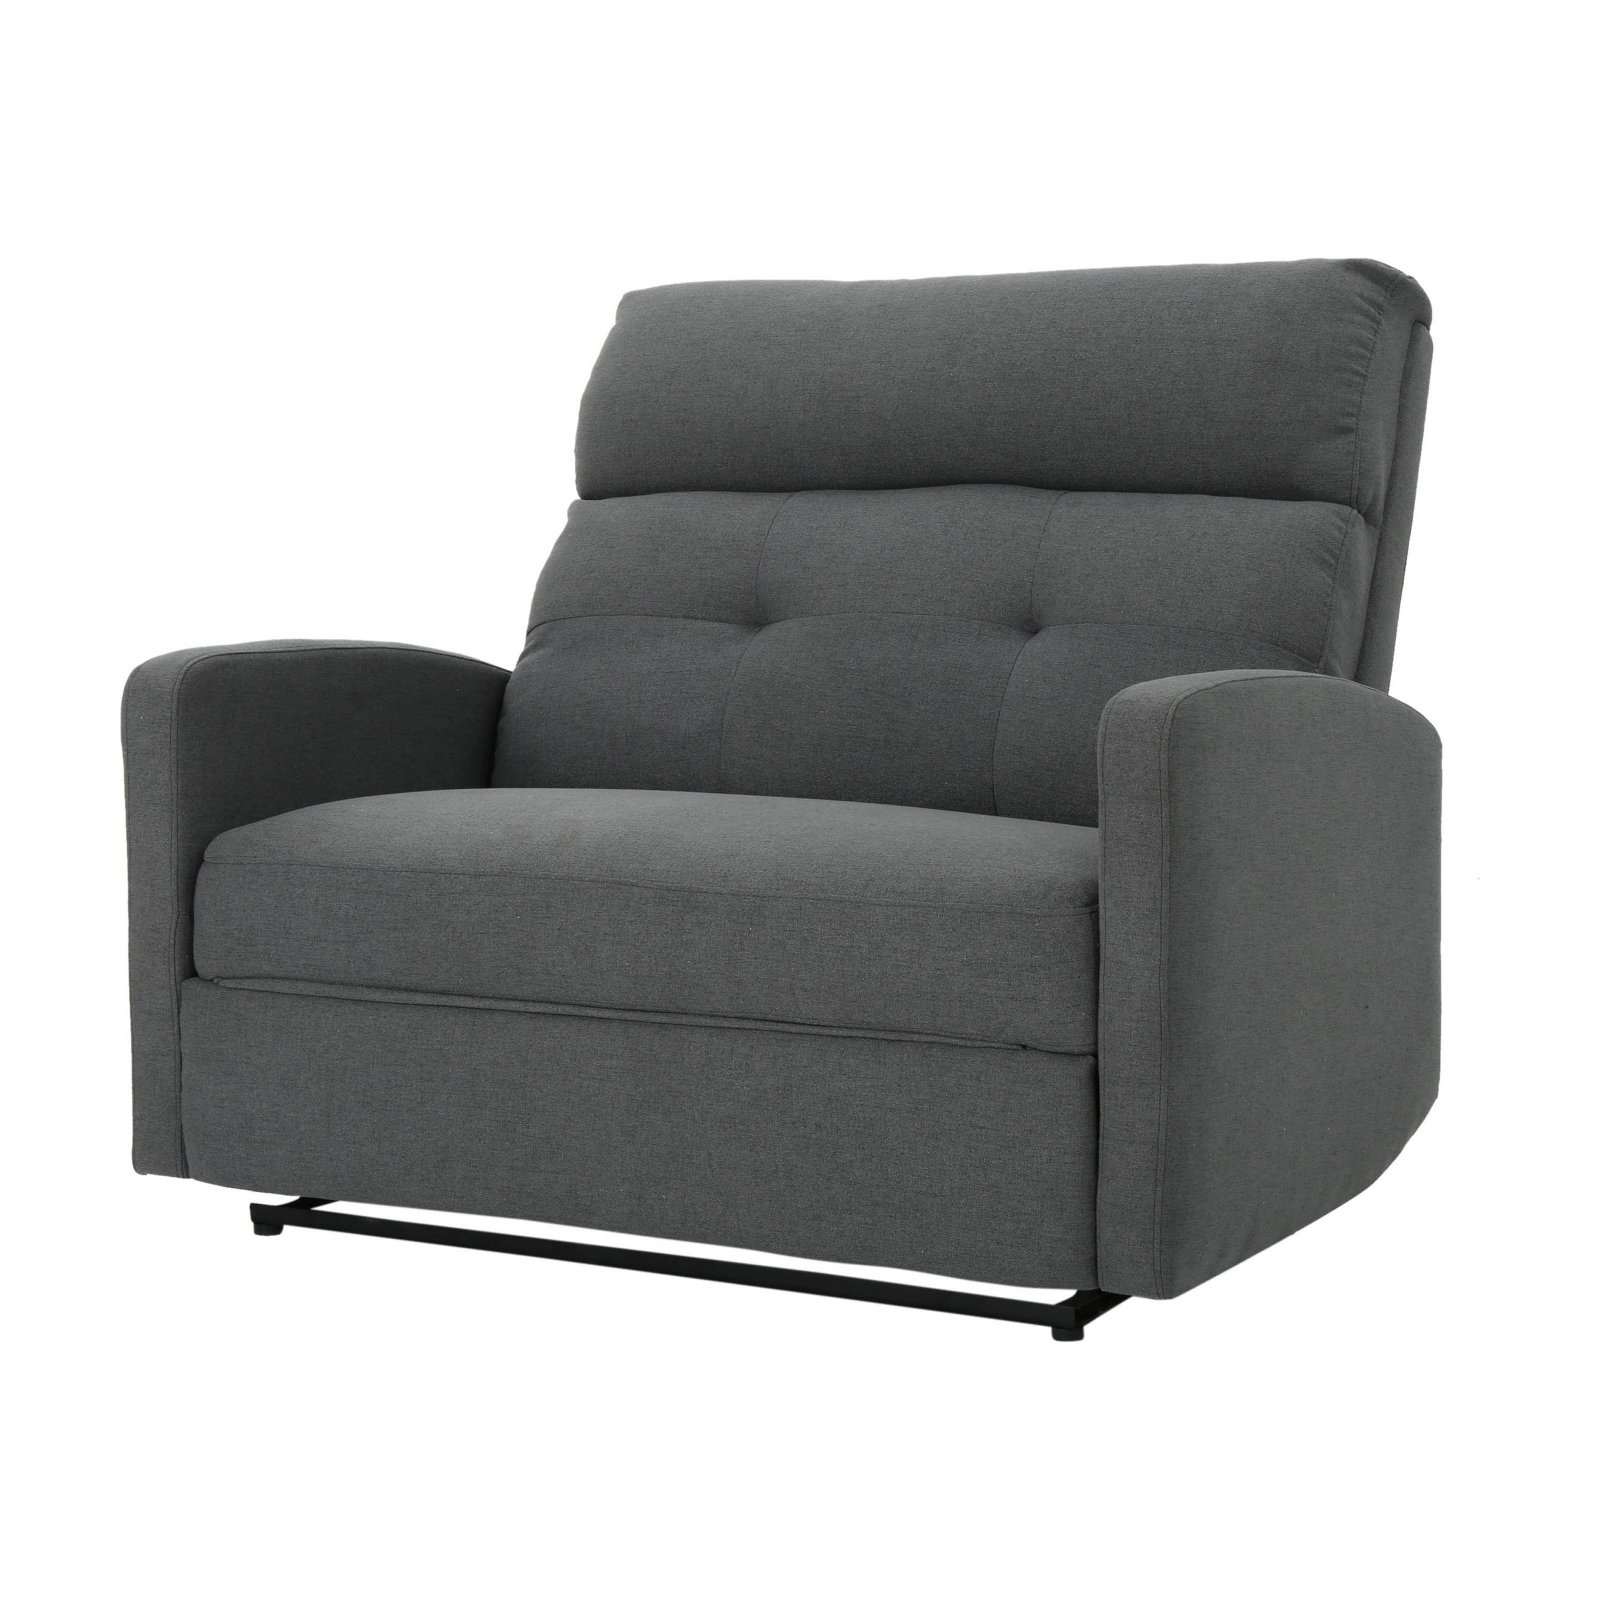 Halima Tufted 2 Seater Recliner - image 1 of 10